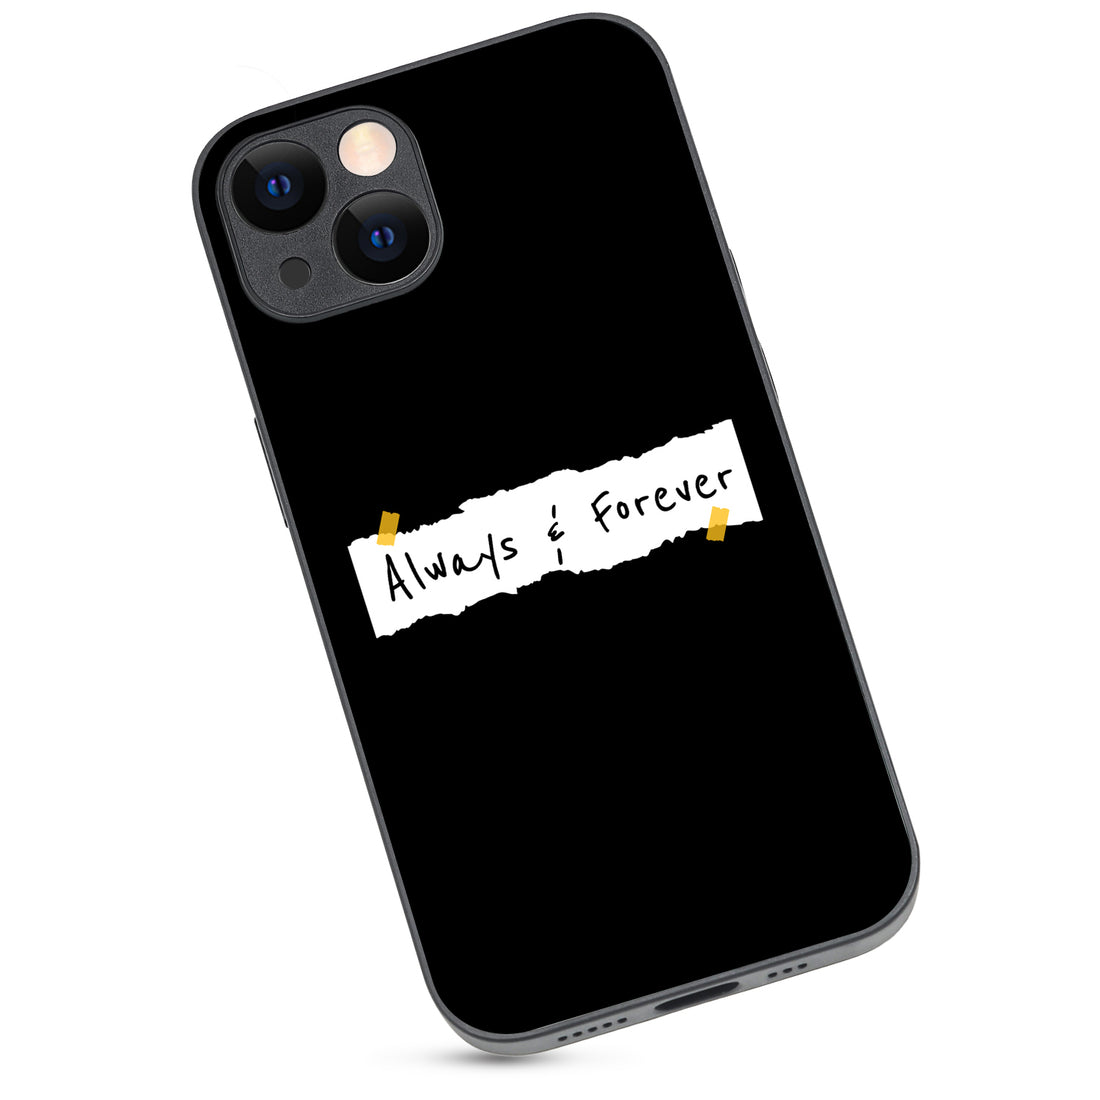 Always And Forever Bff iPhone 13 Case